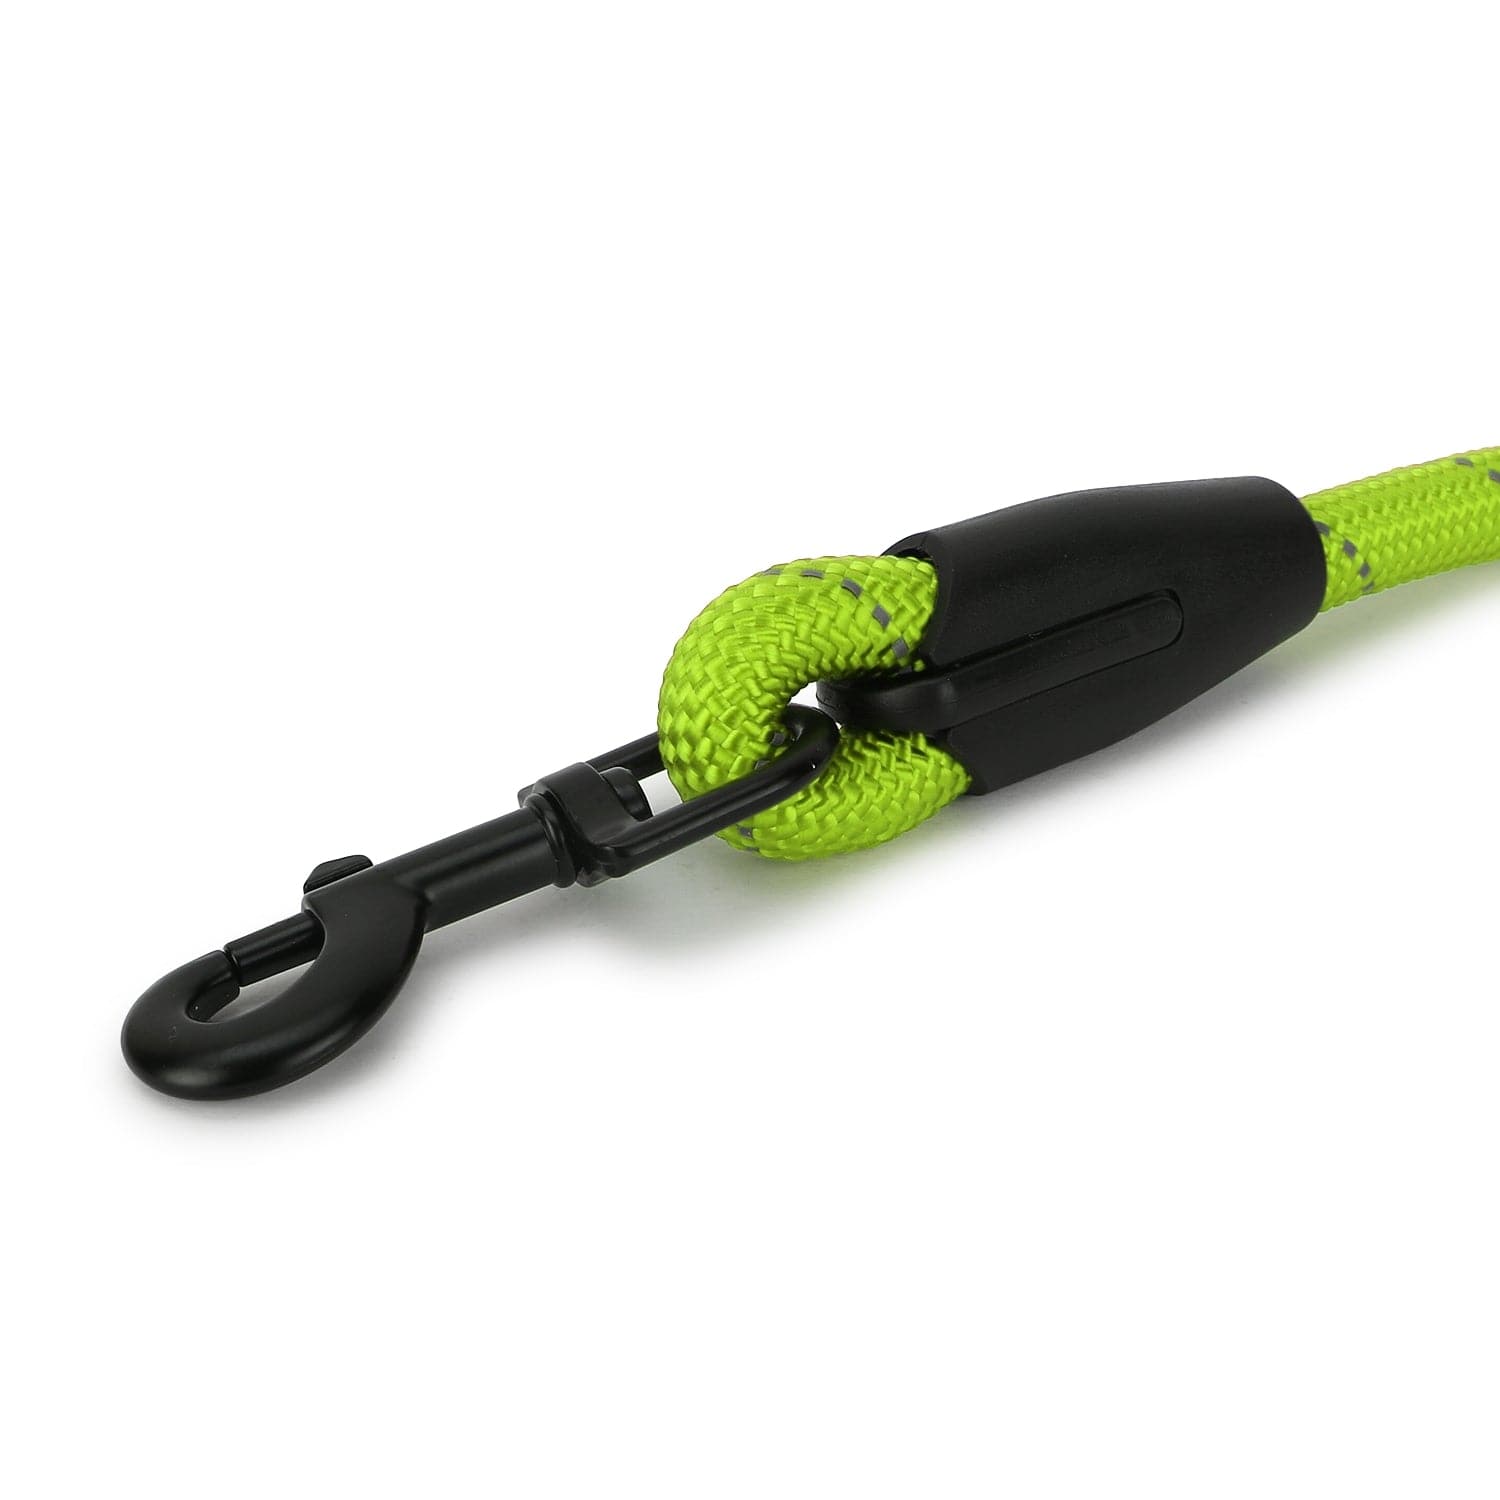 Basil Rope Leash for Dogs and Cats (Green)